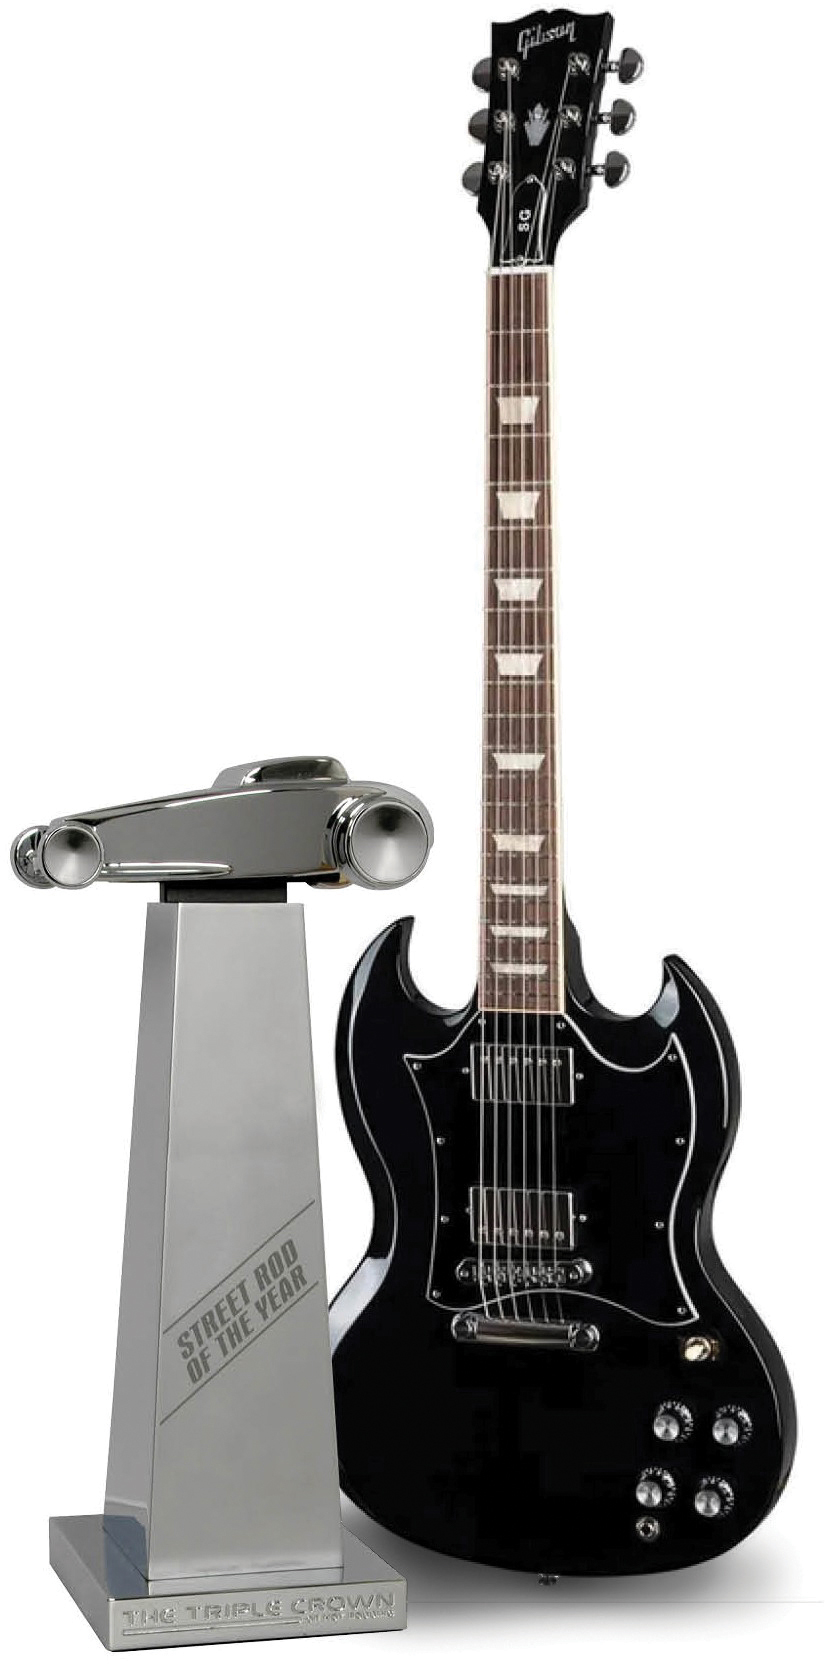 Gibson 5G guitar next to silver trophy with a hot rod on top